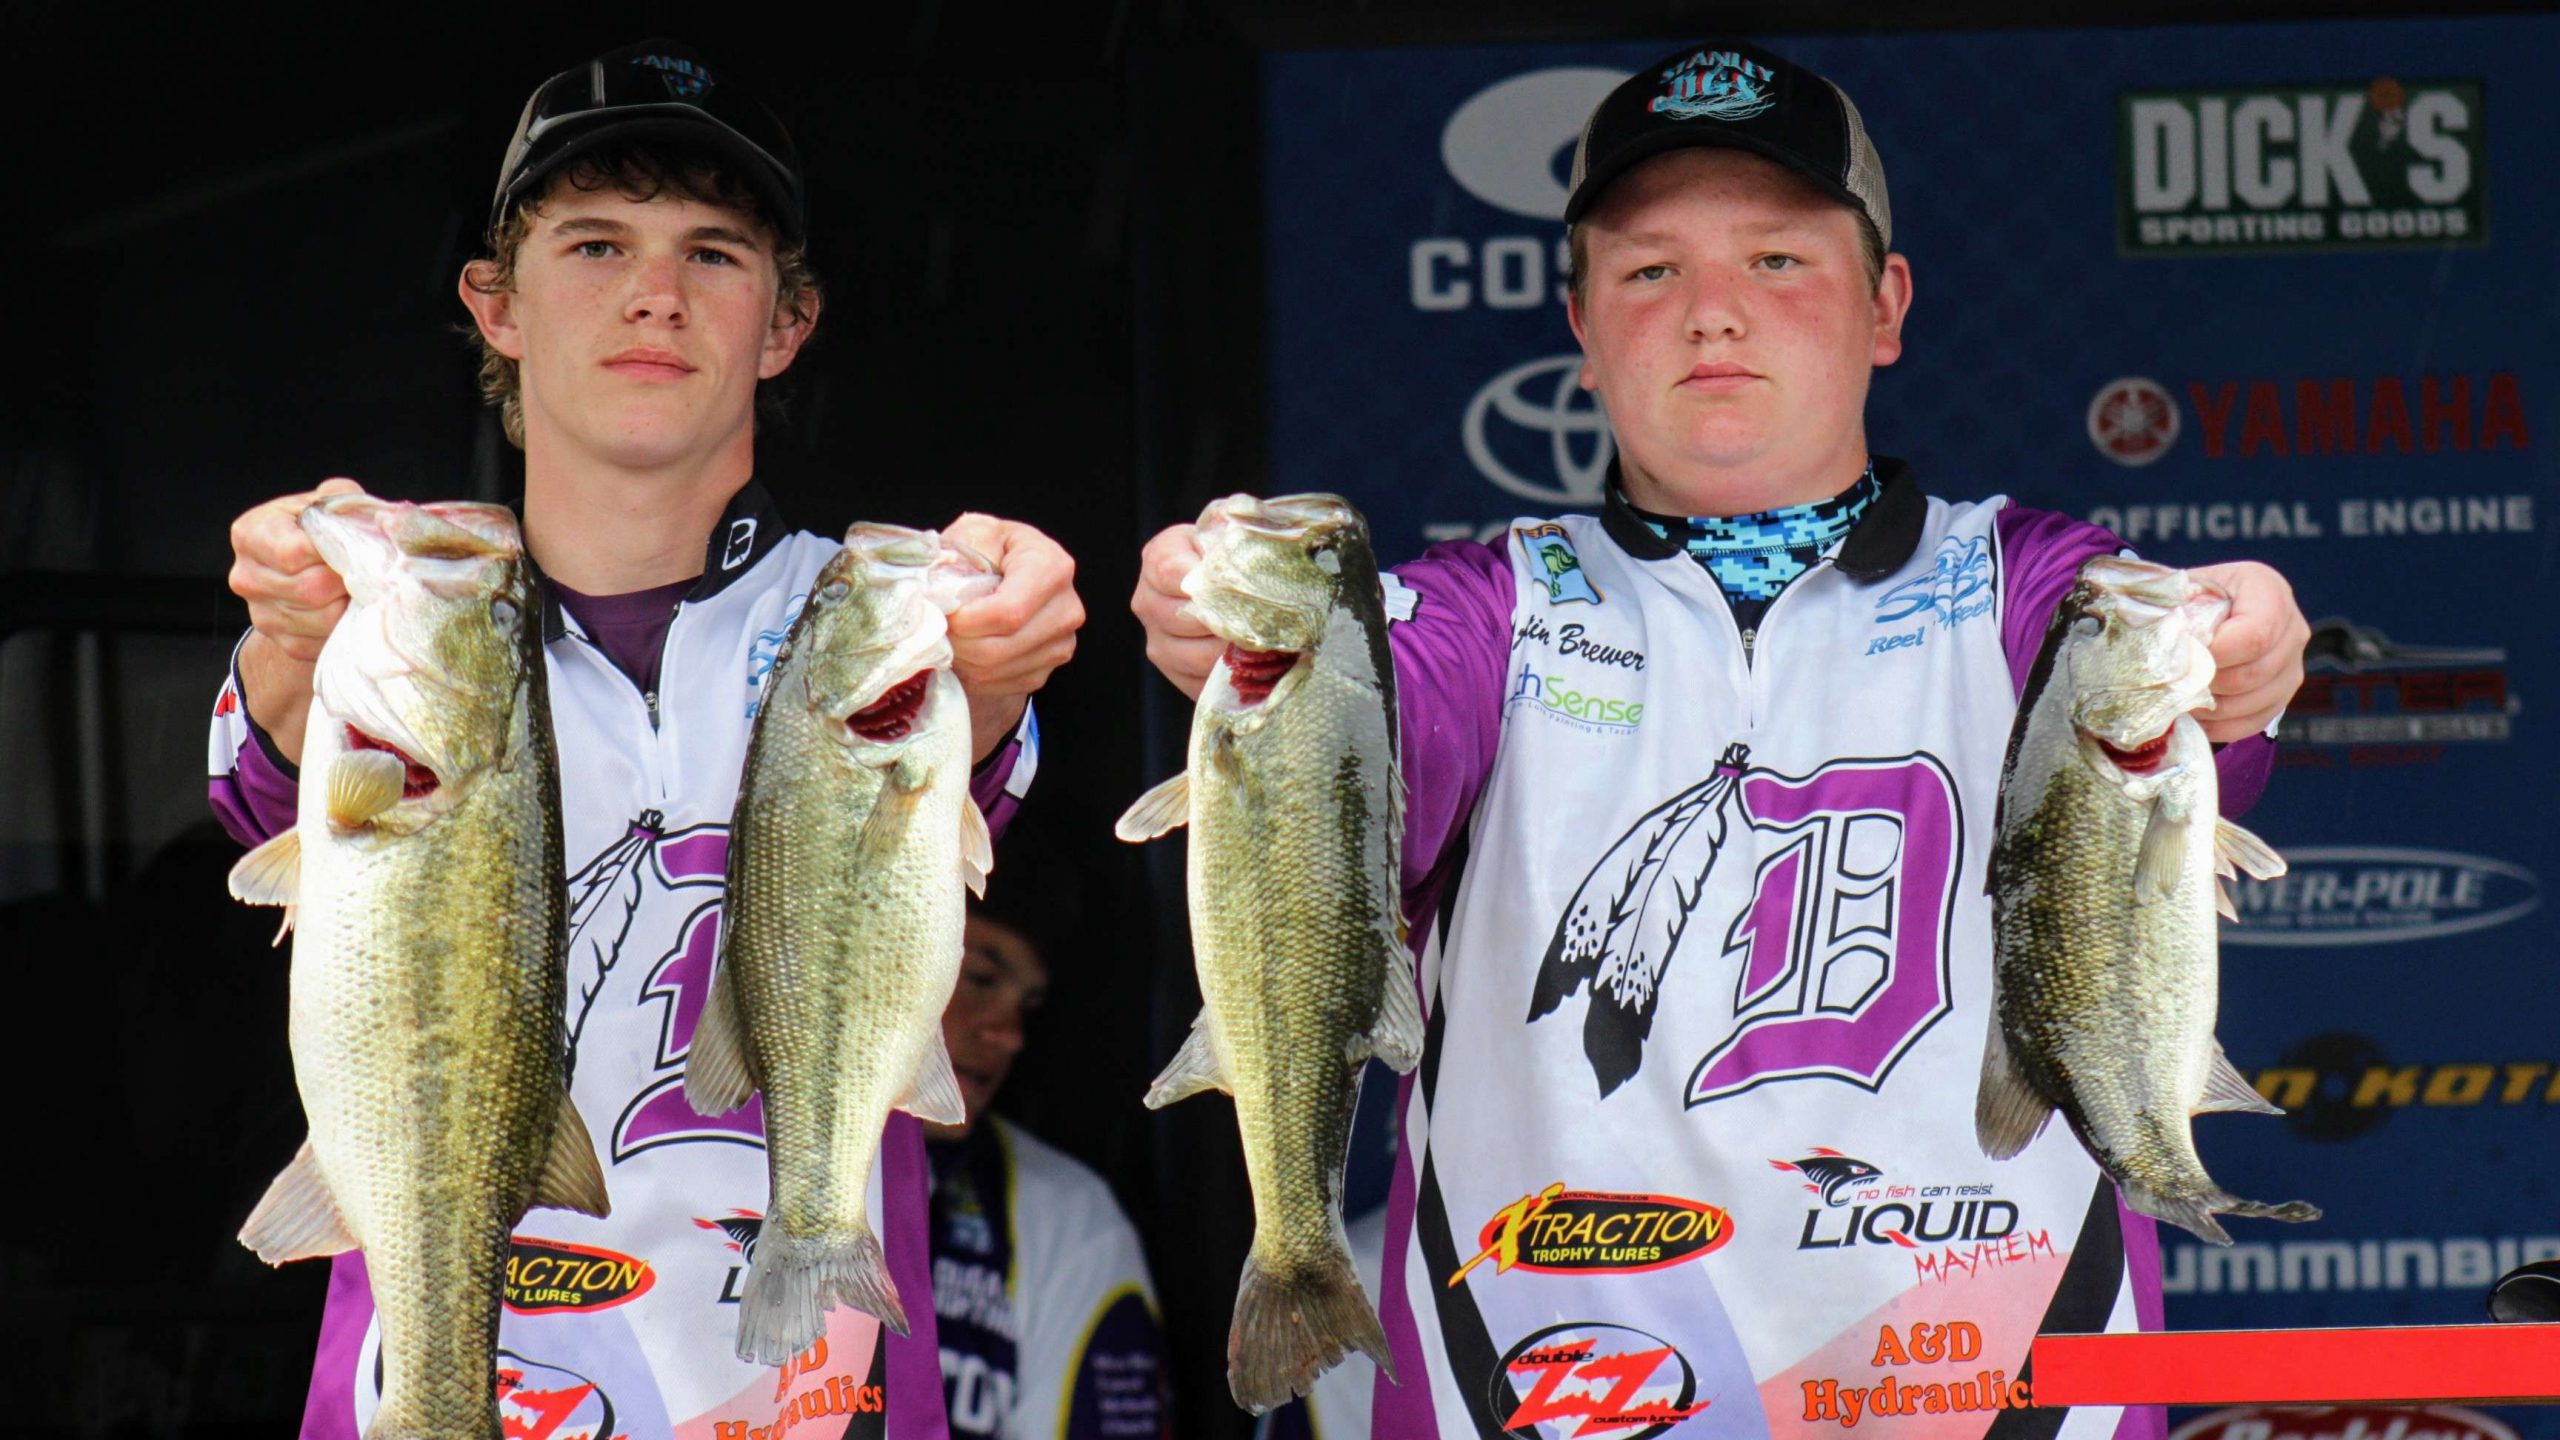   Jacob Bruner and Ausin Brewer of Douglass (Tex.) High School
  finished ninth with 17-11.
